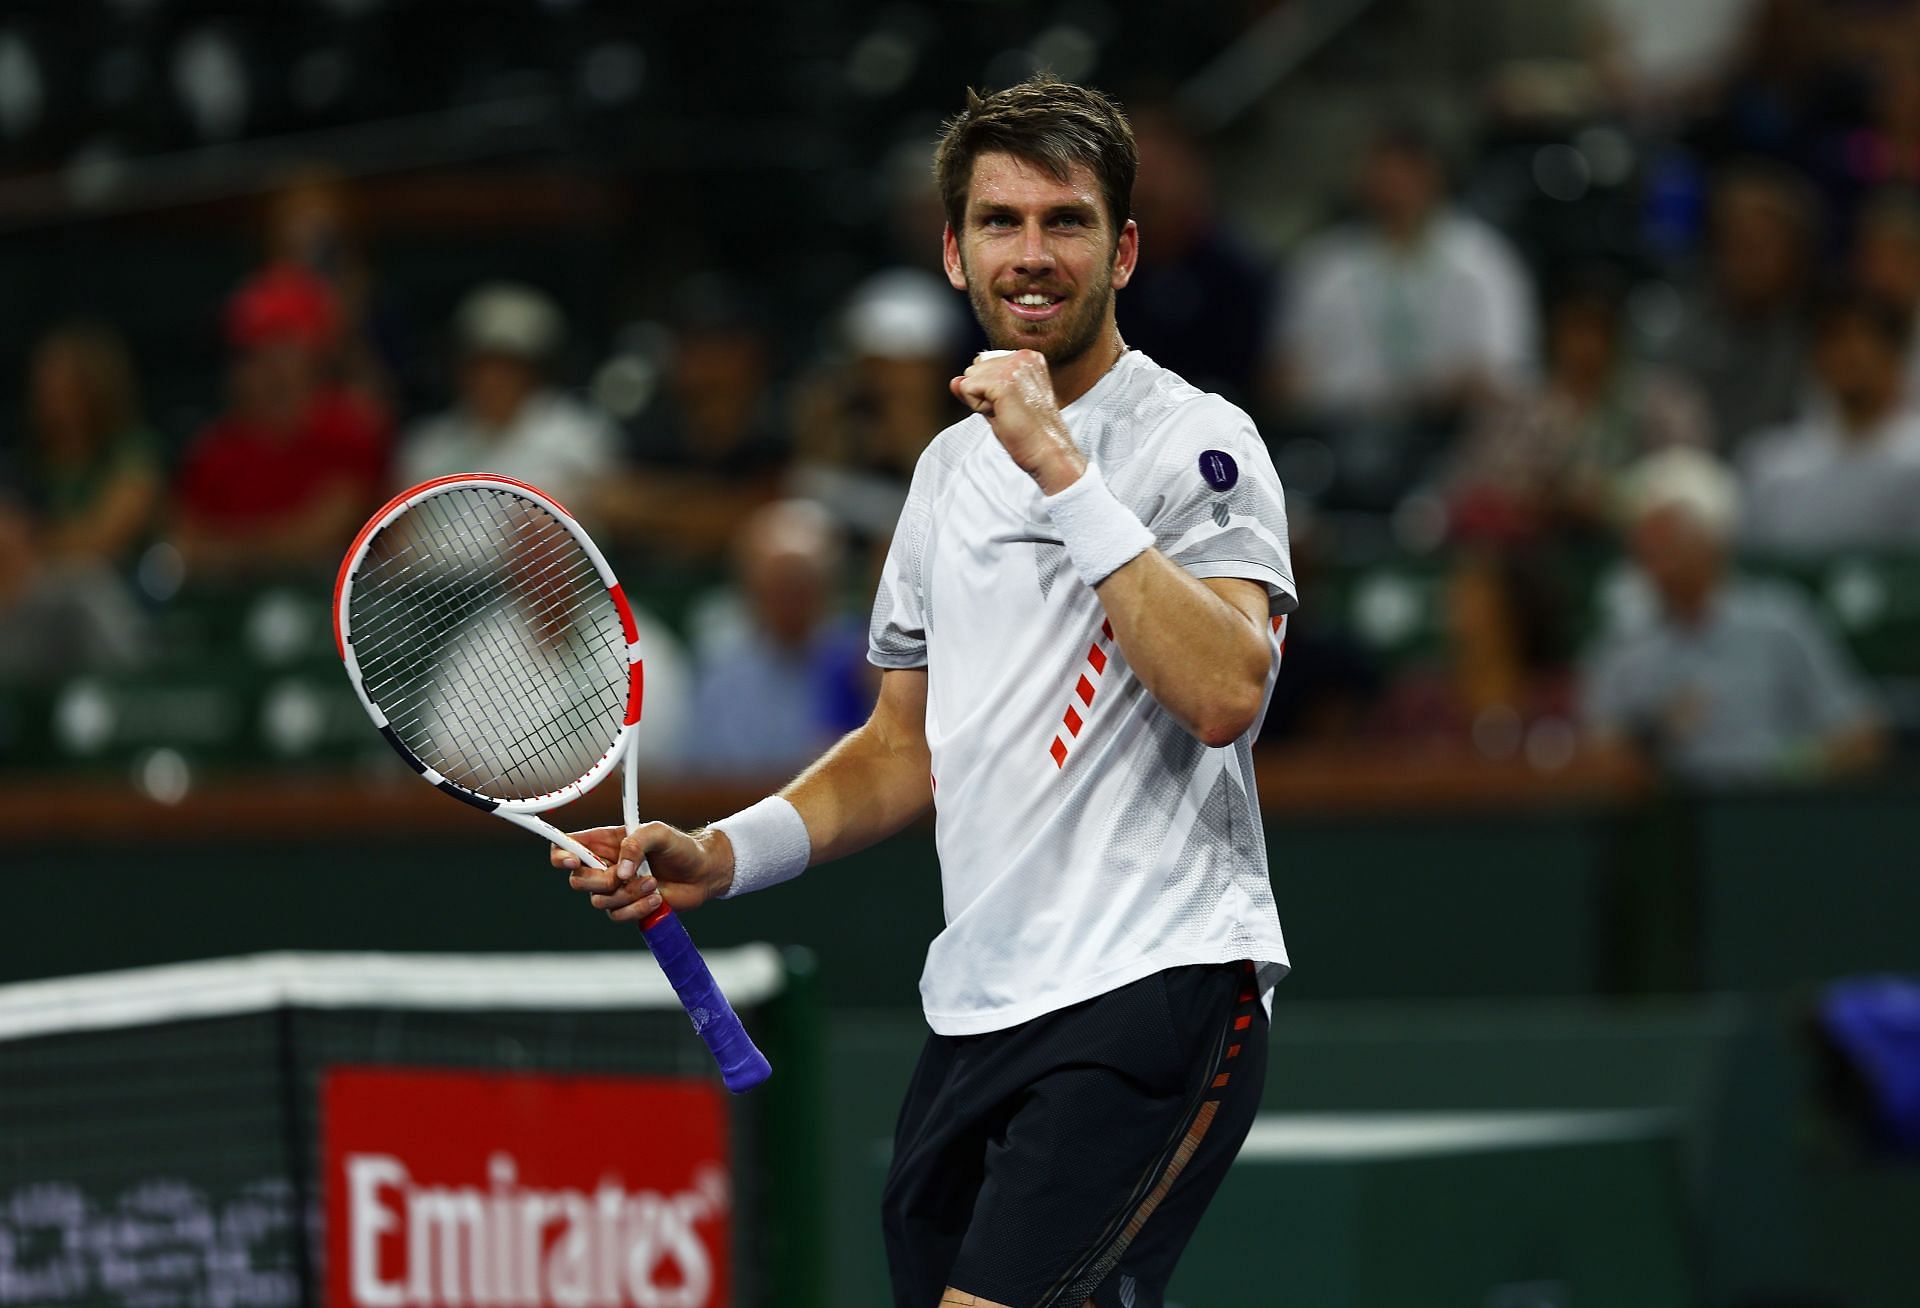 Cameron Norrie at the 2022 BNP Paribas Open